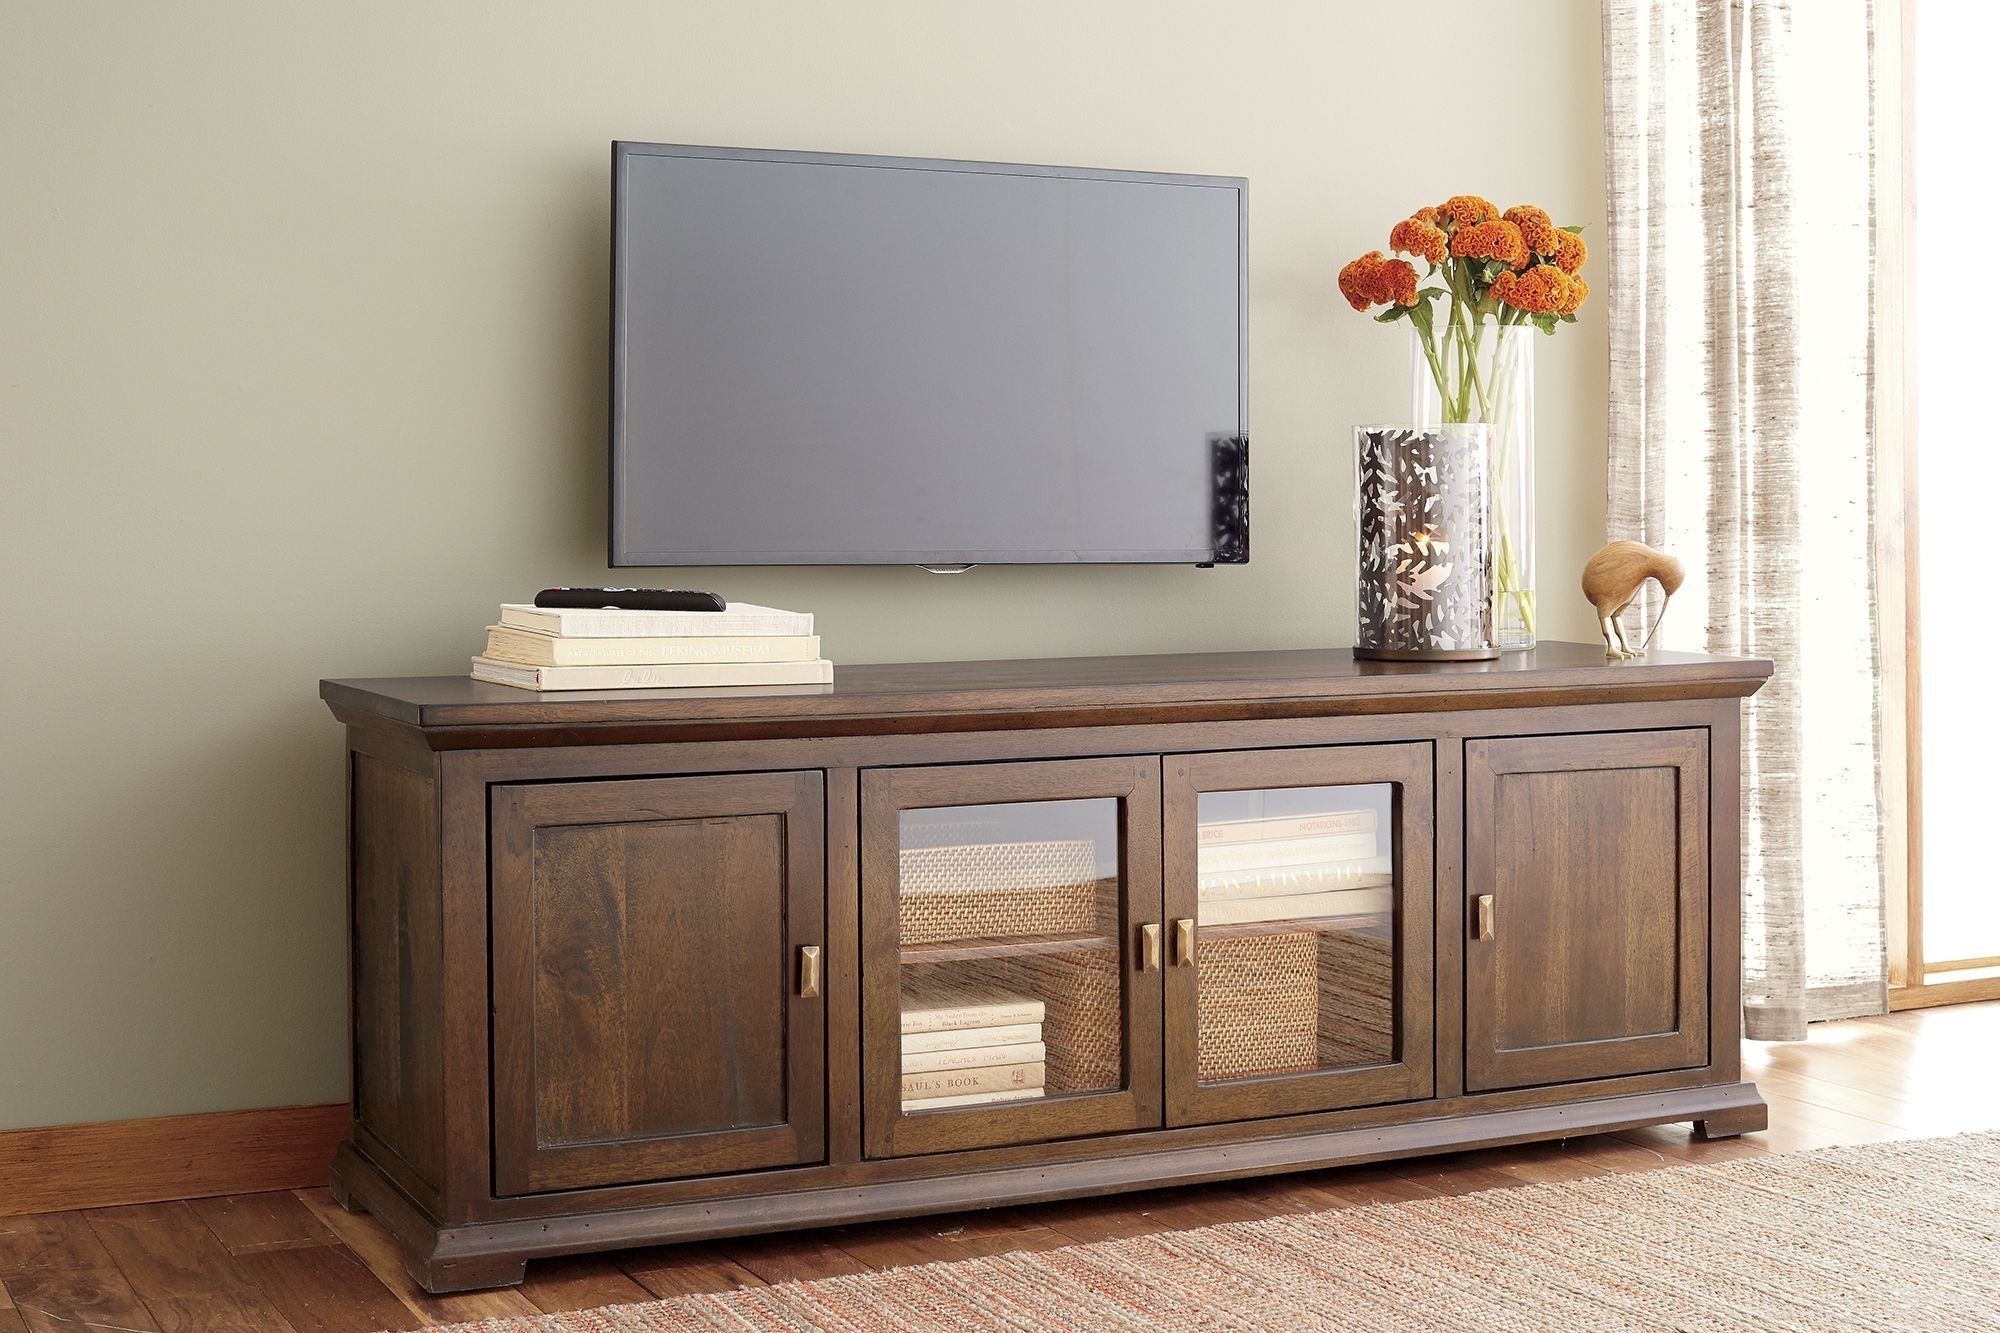 Crowne 72" Media Console | Living Rooms | Pinterest | Traditional Regarding Most Recent Walnut Finish Crown Moulding Sideboards (Photo 14 of 20)